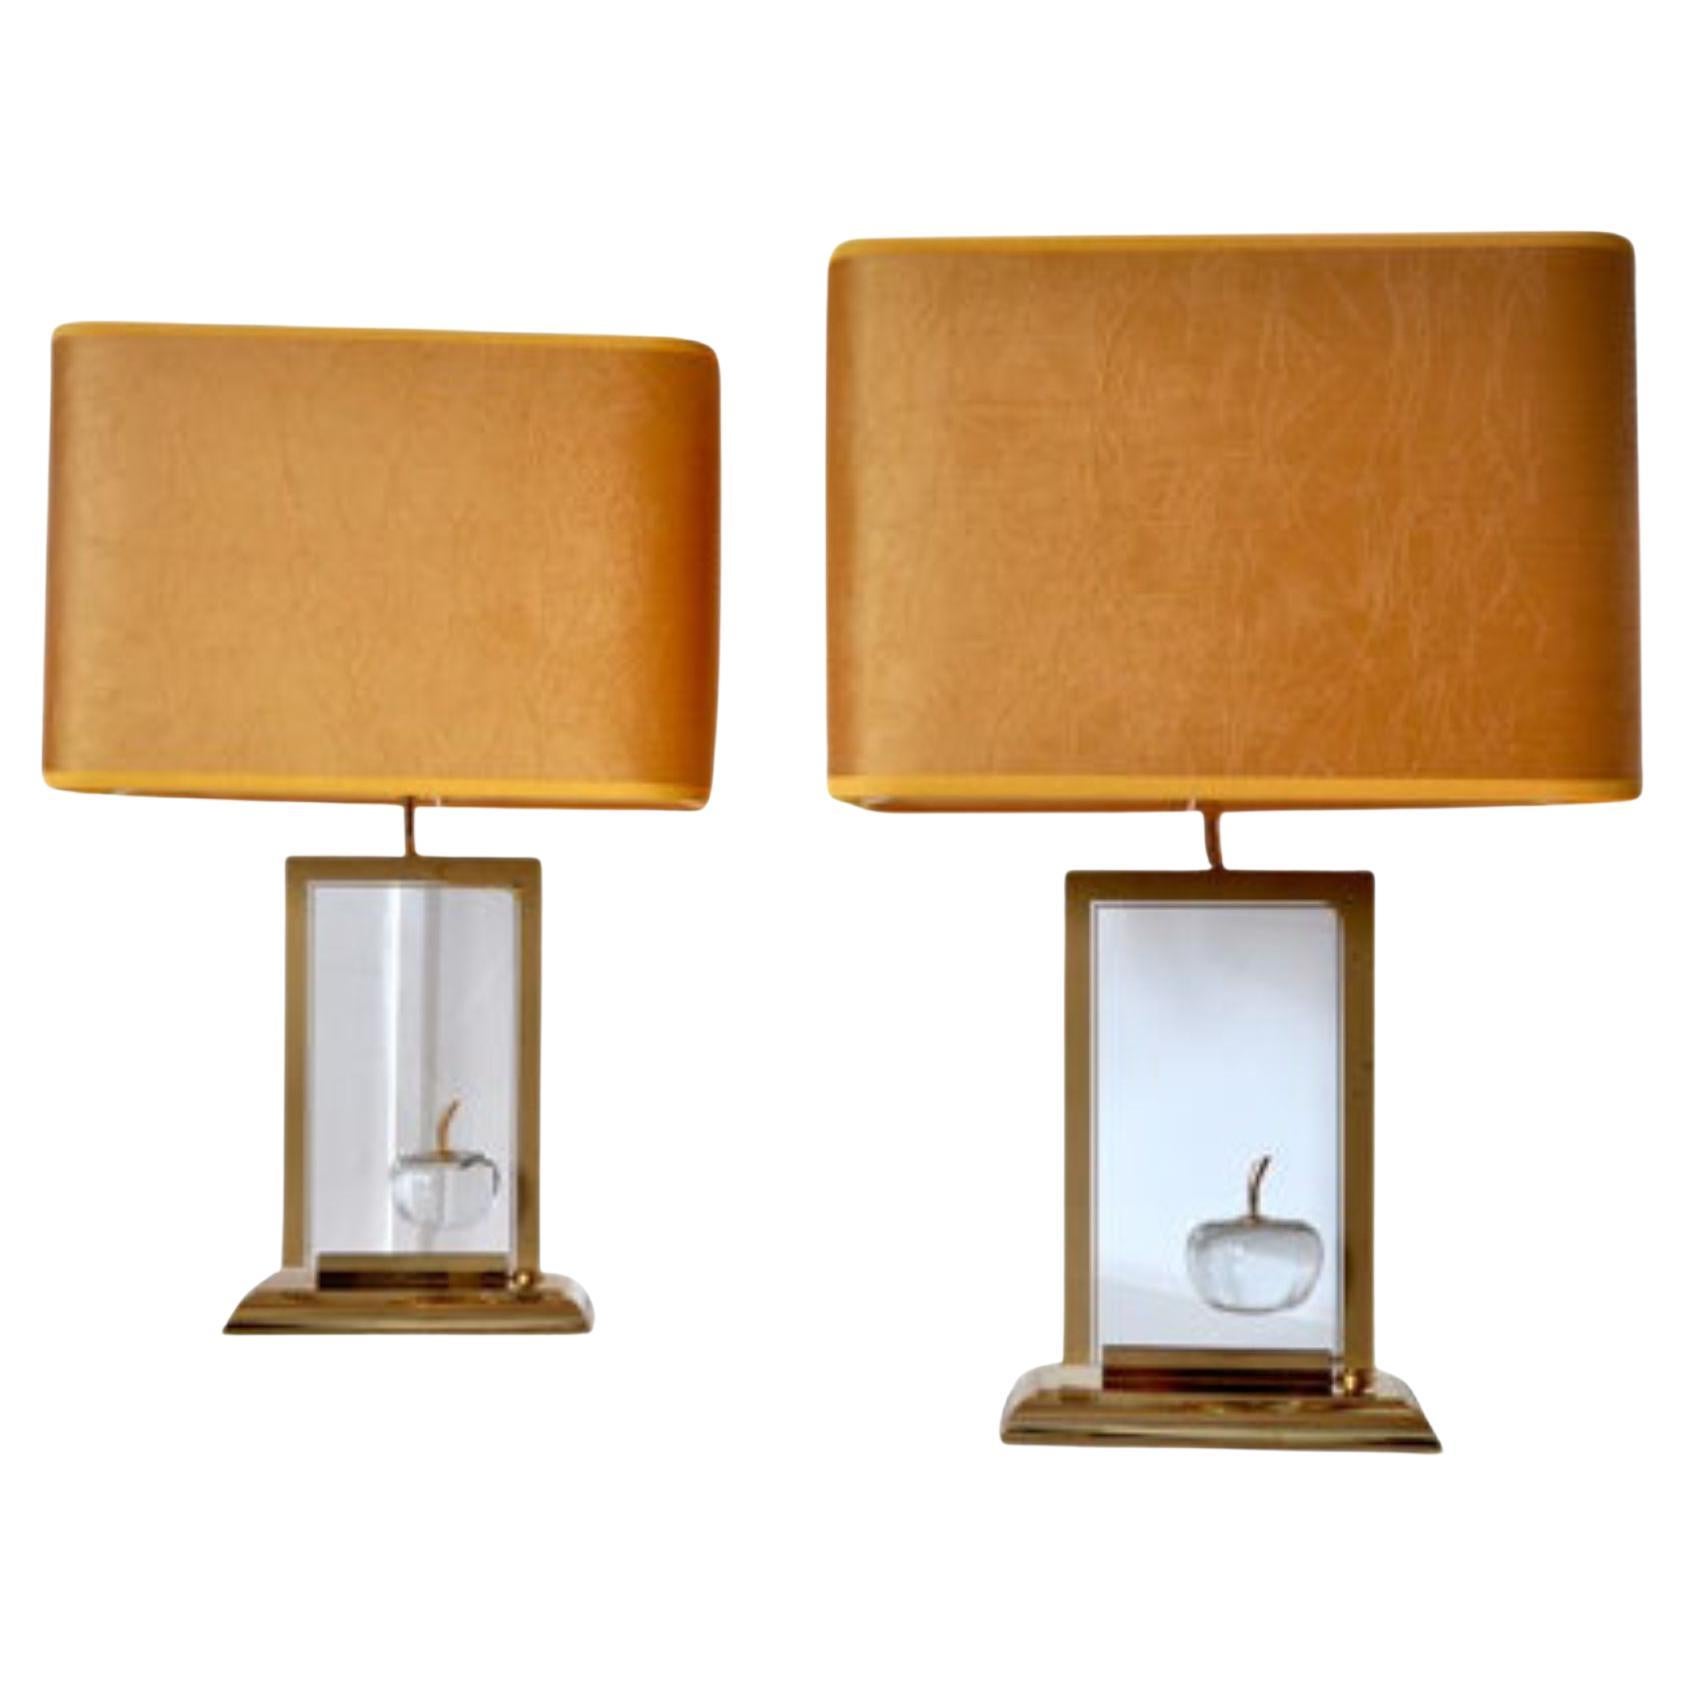 1970s "La Pomme" Table Lamp From Maison Dauphin, France - a Pair